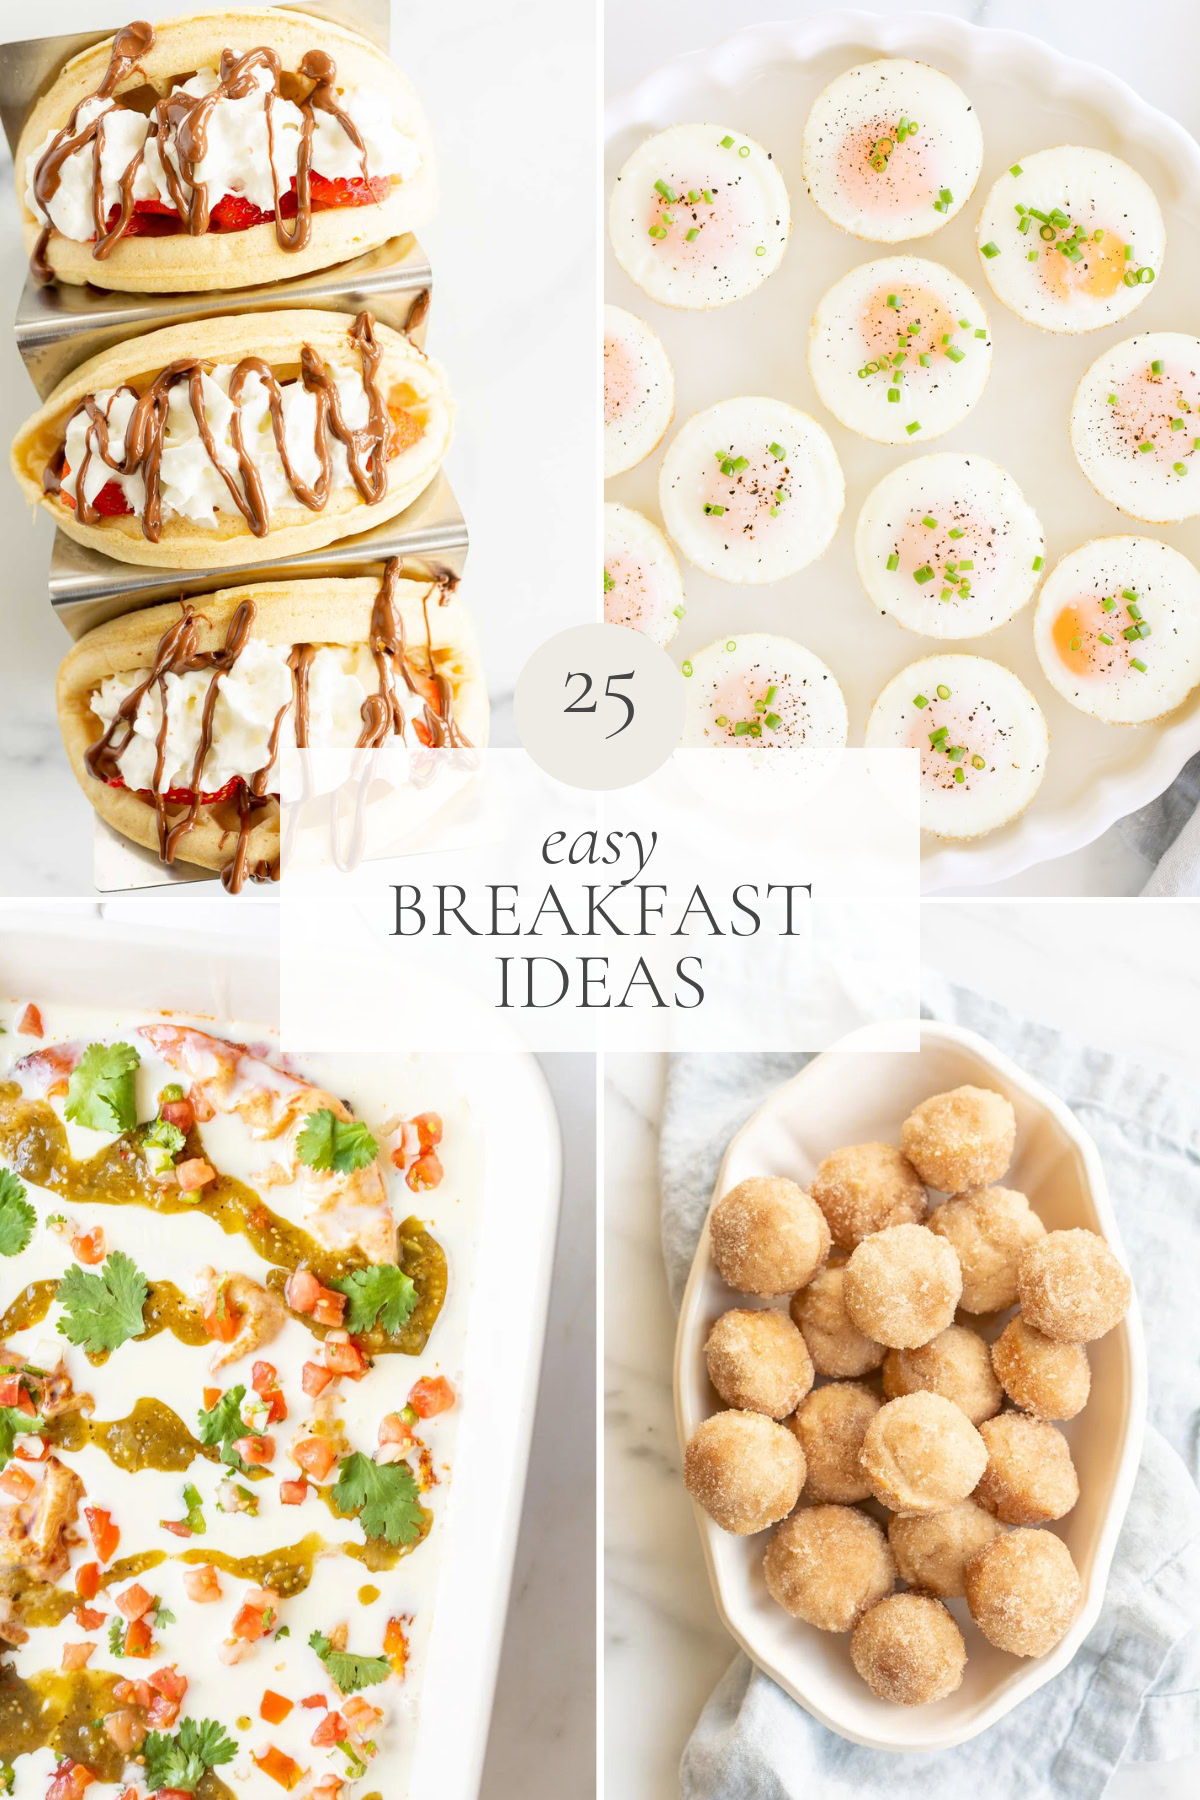 Collage of various breakfast dishes: tacos with syrup and whipped cream, eggs in round shapes seasoned with herbs, a colorful casserole, and a bowl of bite-sized sugar-dusted donuts. Text reads "25 easy breakfast ideas" to jump-start your morning.